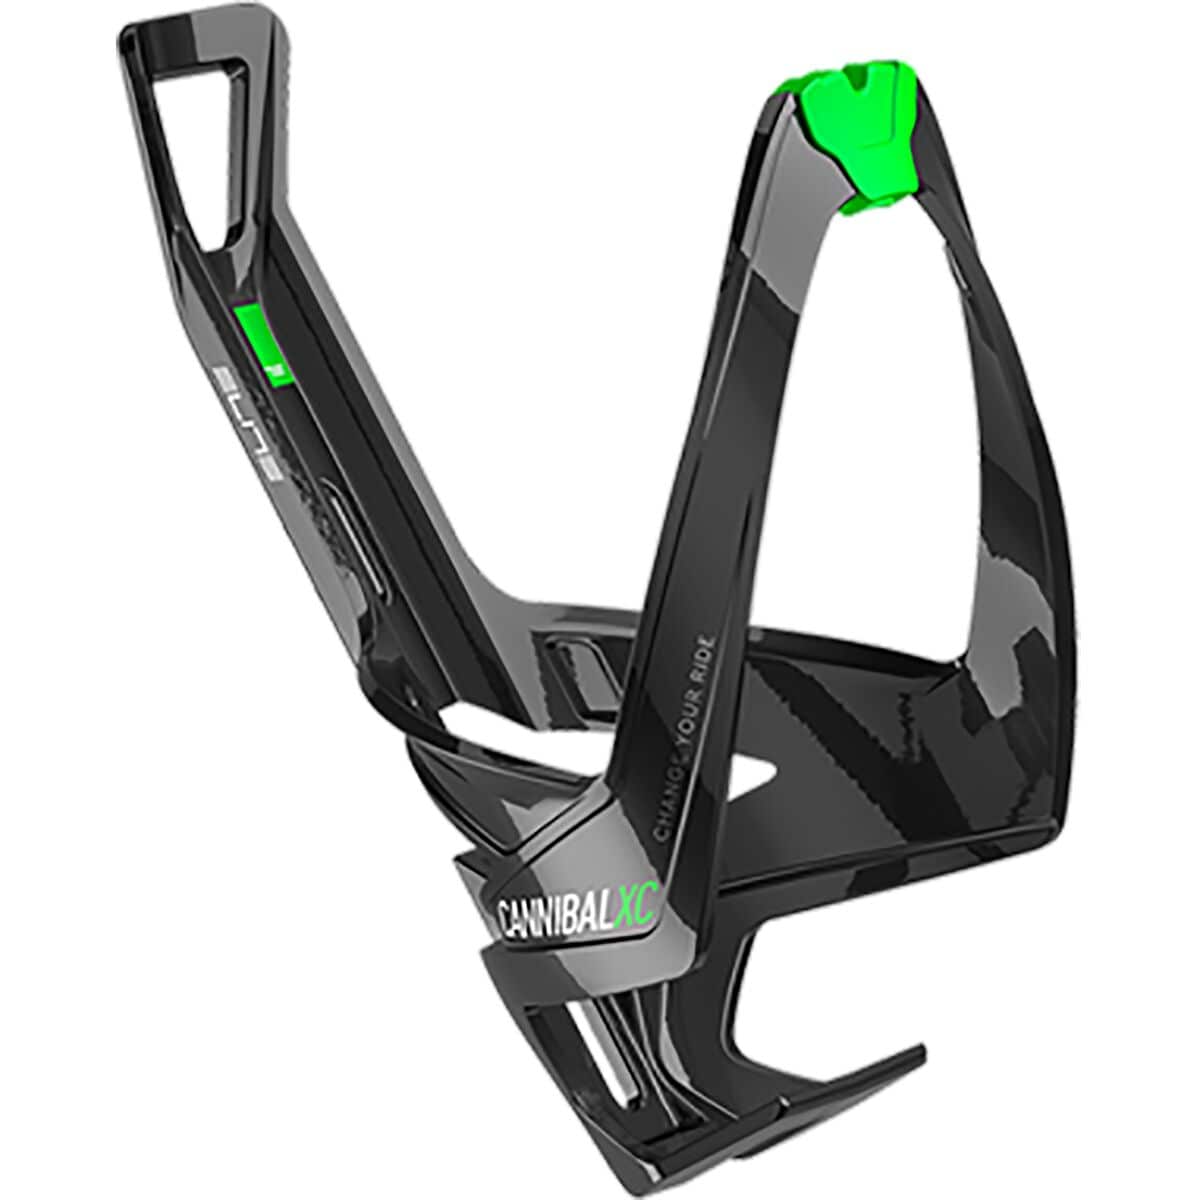 Elite Cannibal XC Bottle Cage Gloss Black/Green, One Size